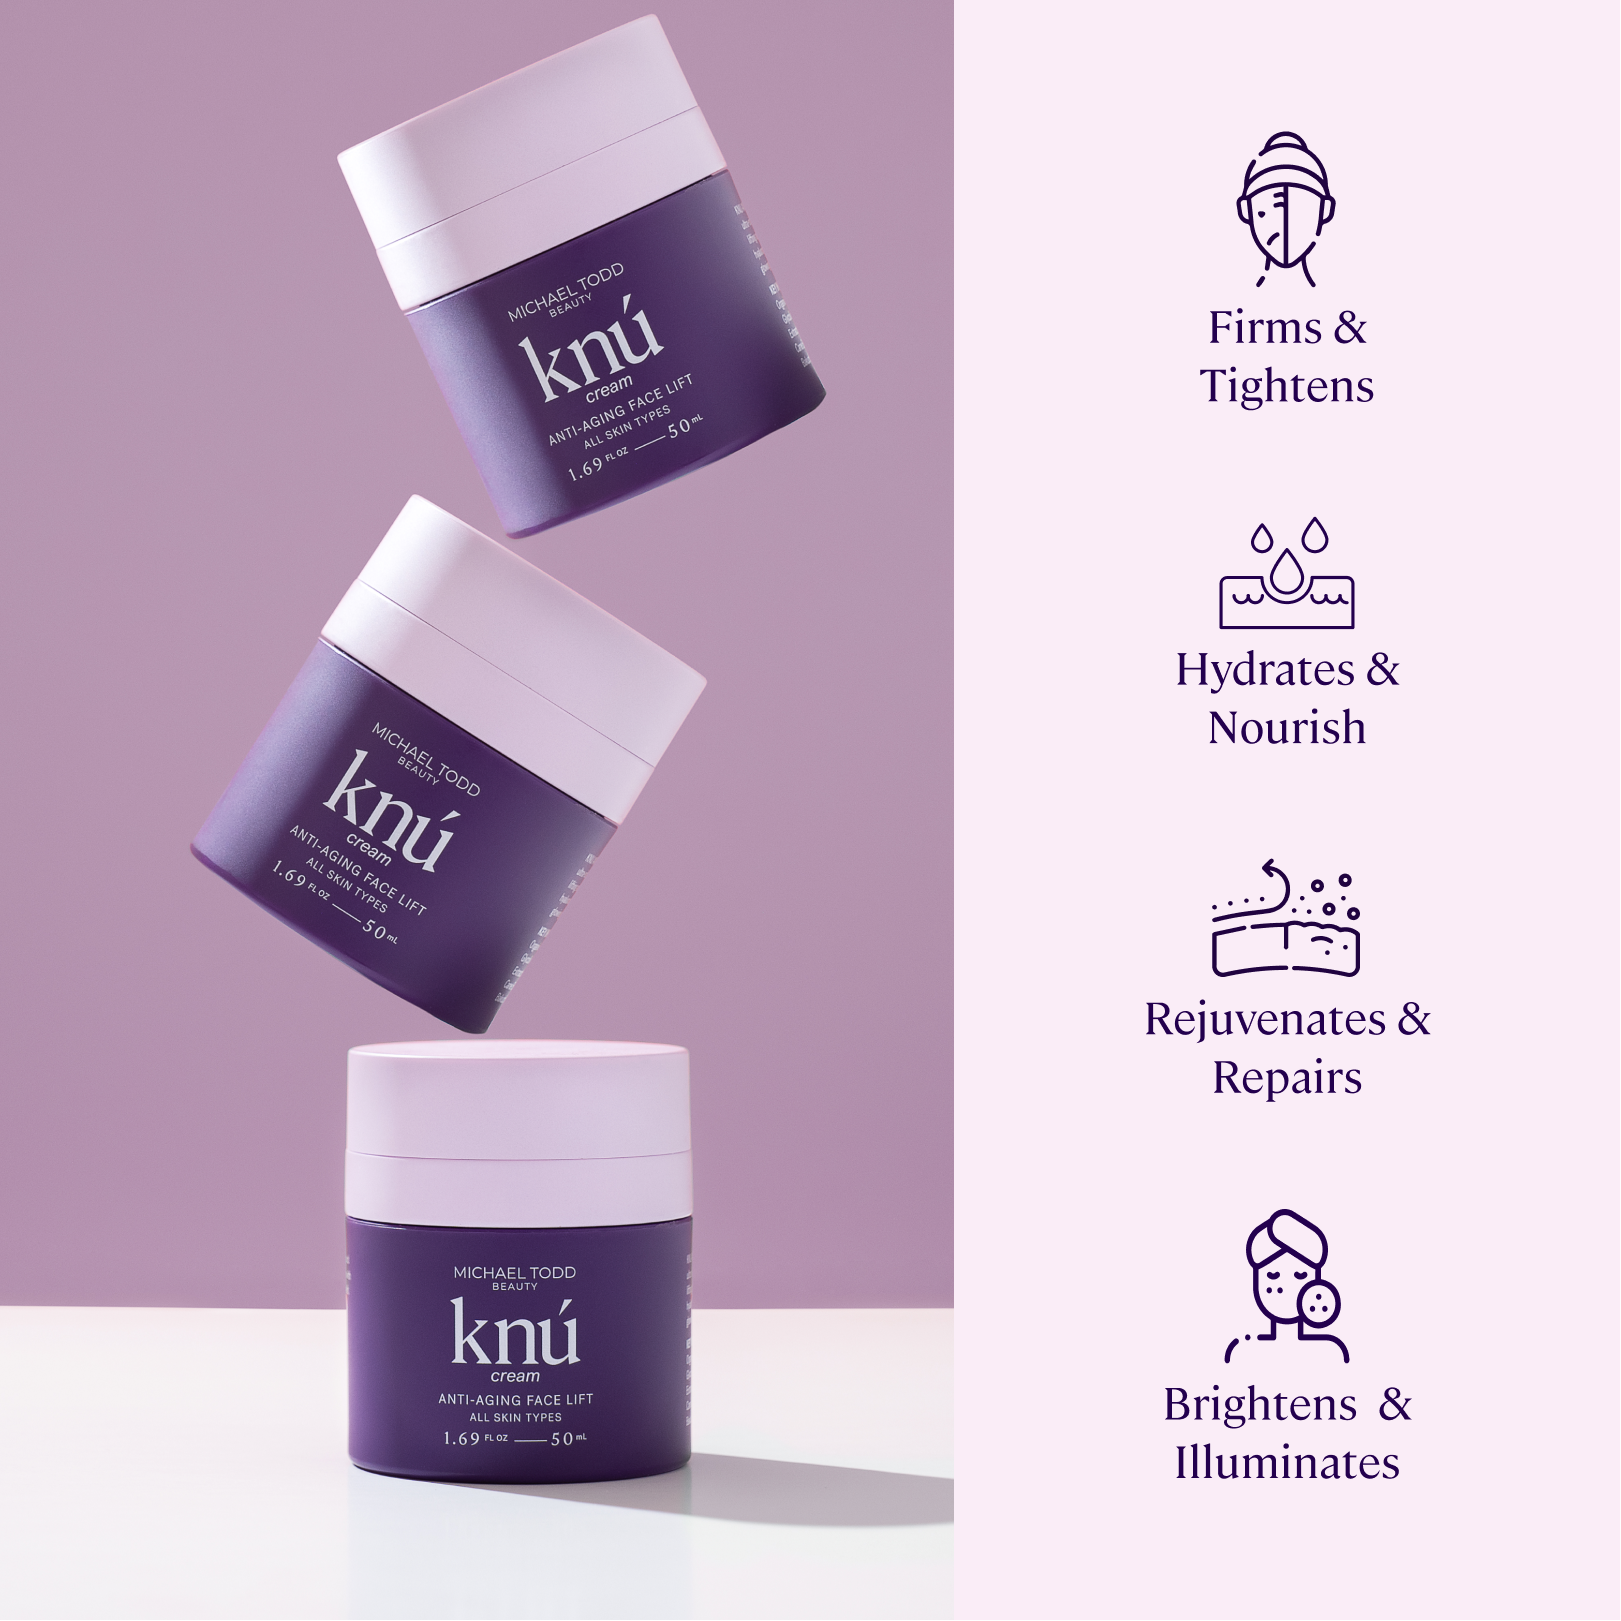 Three jars of Knú Ageless Duo skin firmness serum products on a purple background by Michael Todd Beauty.